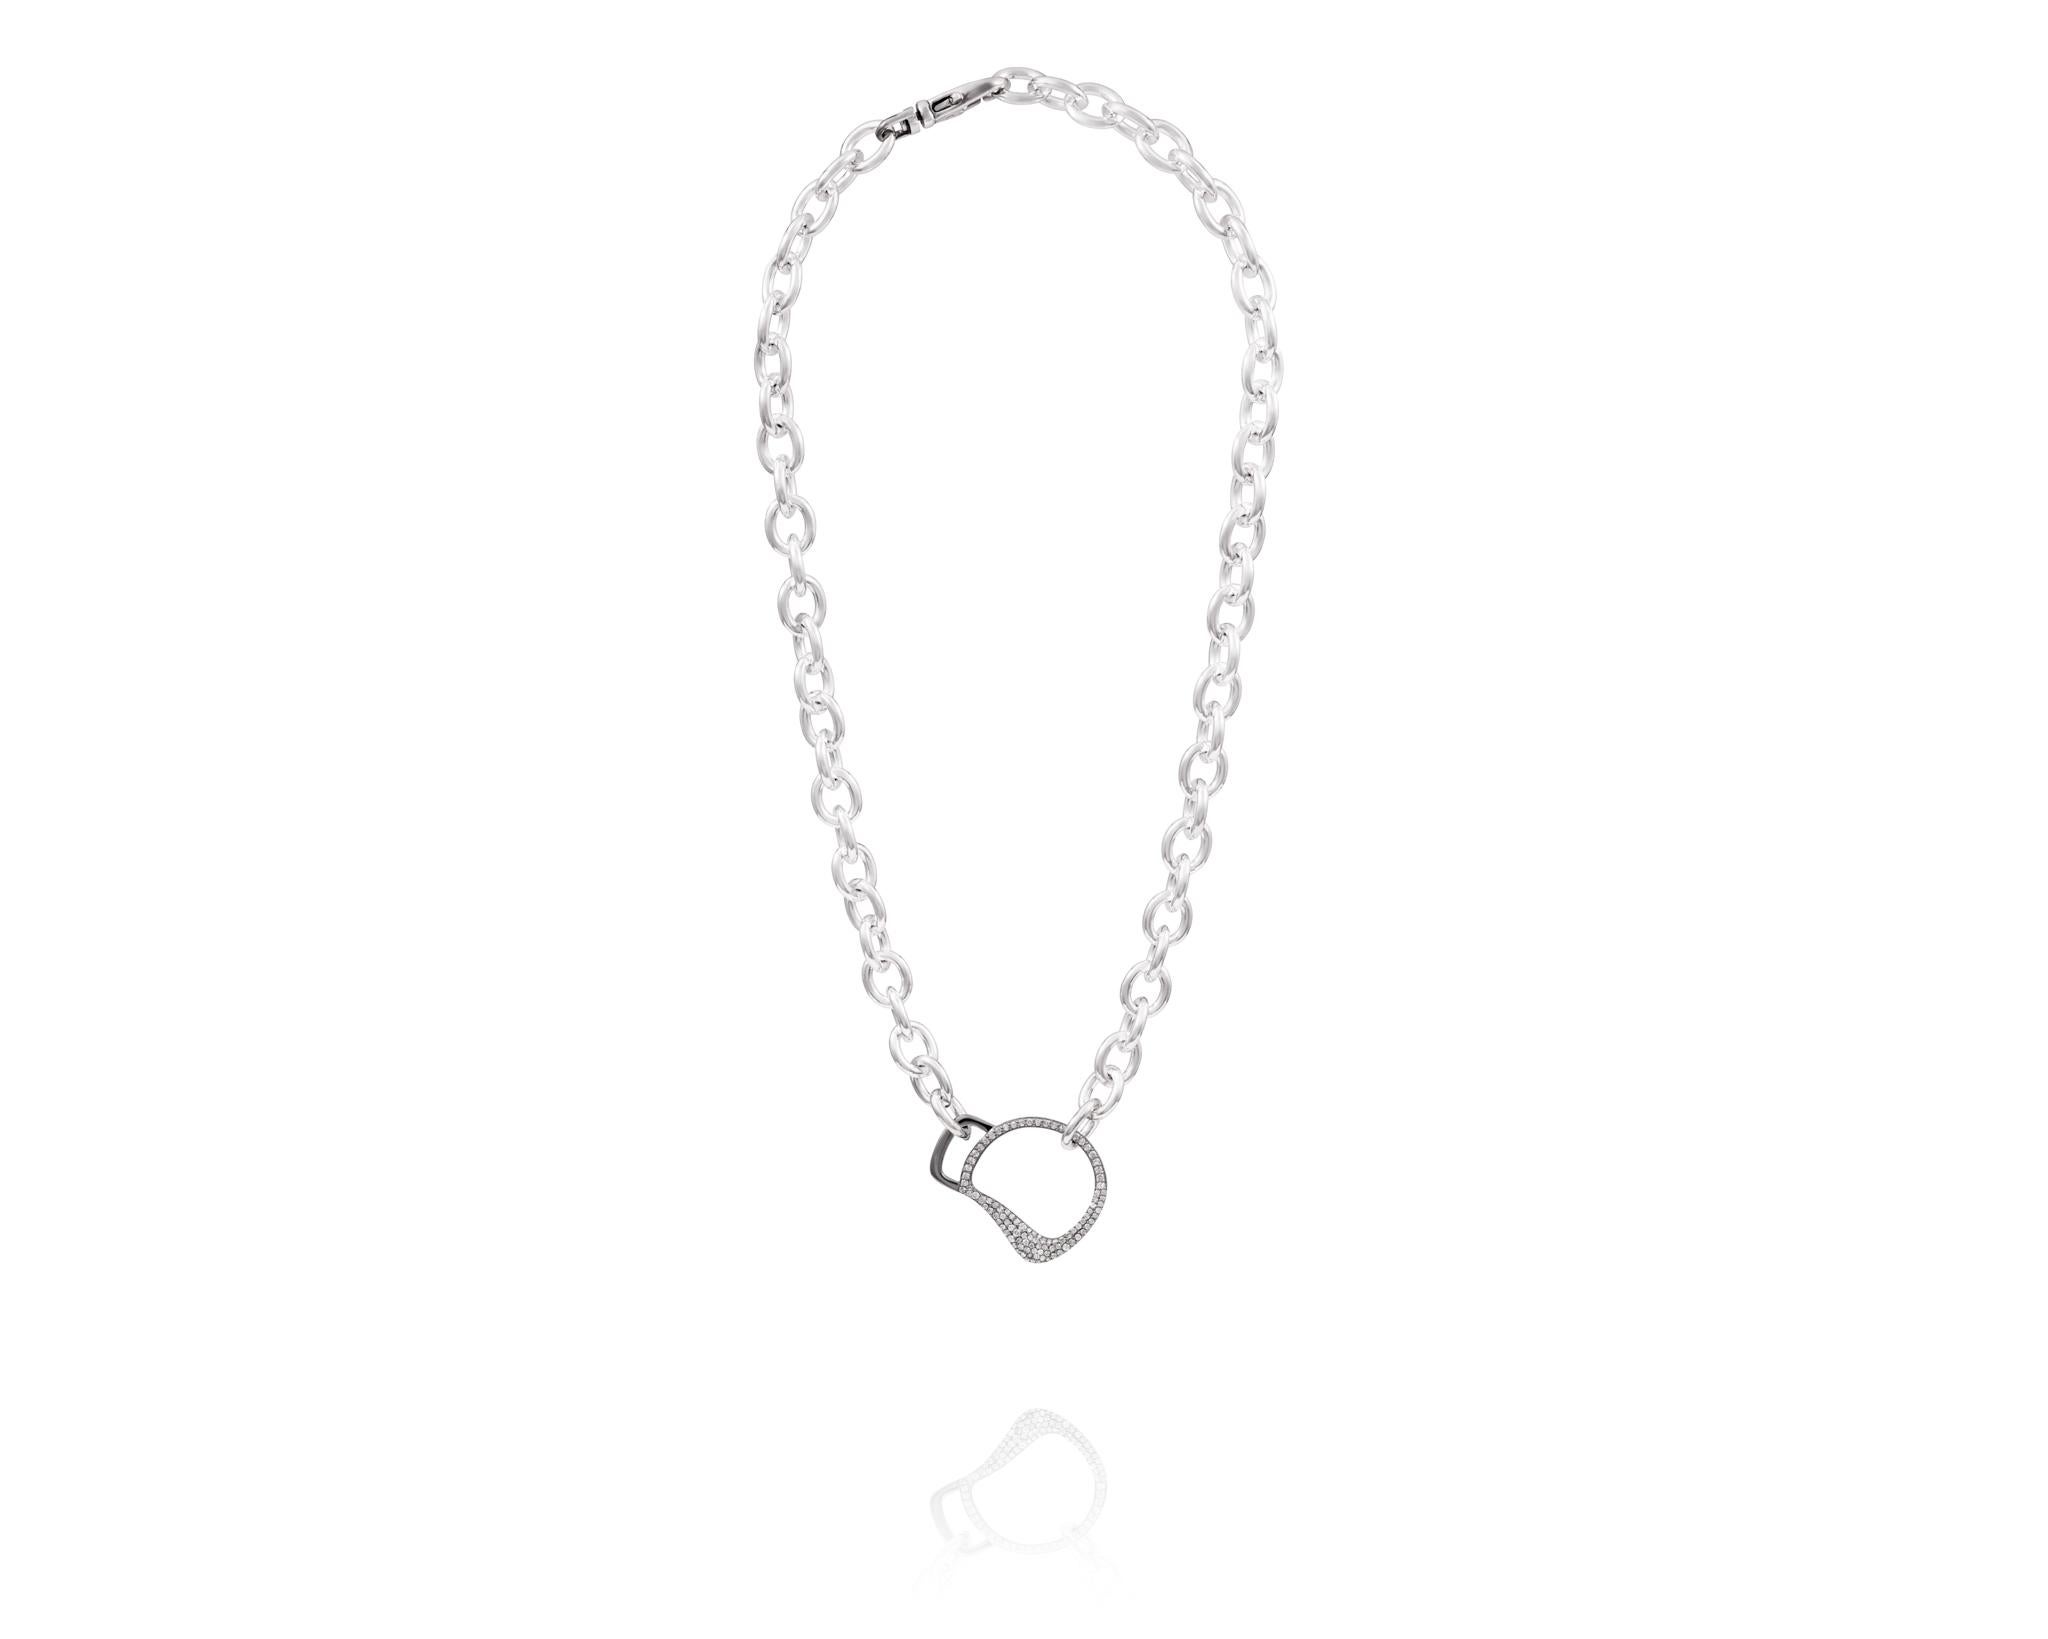 Part of the Vincent Peach Equestrian Collection, the Cheval Bit Chain Necklace has a Sterling Silver Bit Pendant covered in 1.95ct Diamonds on a 17